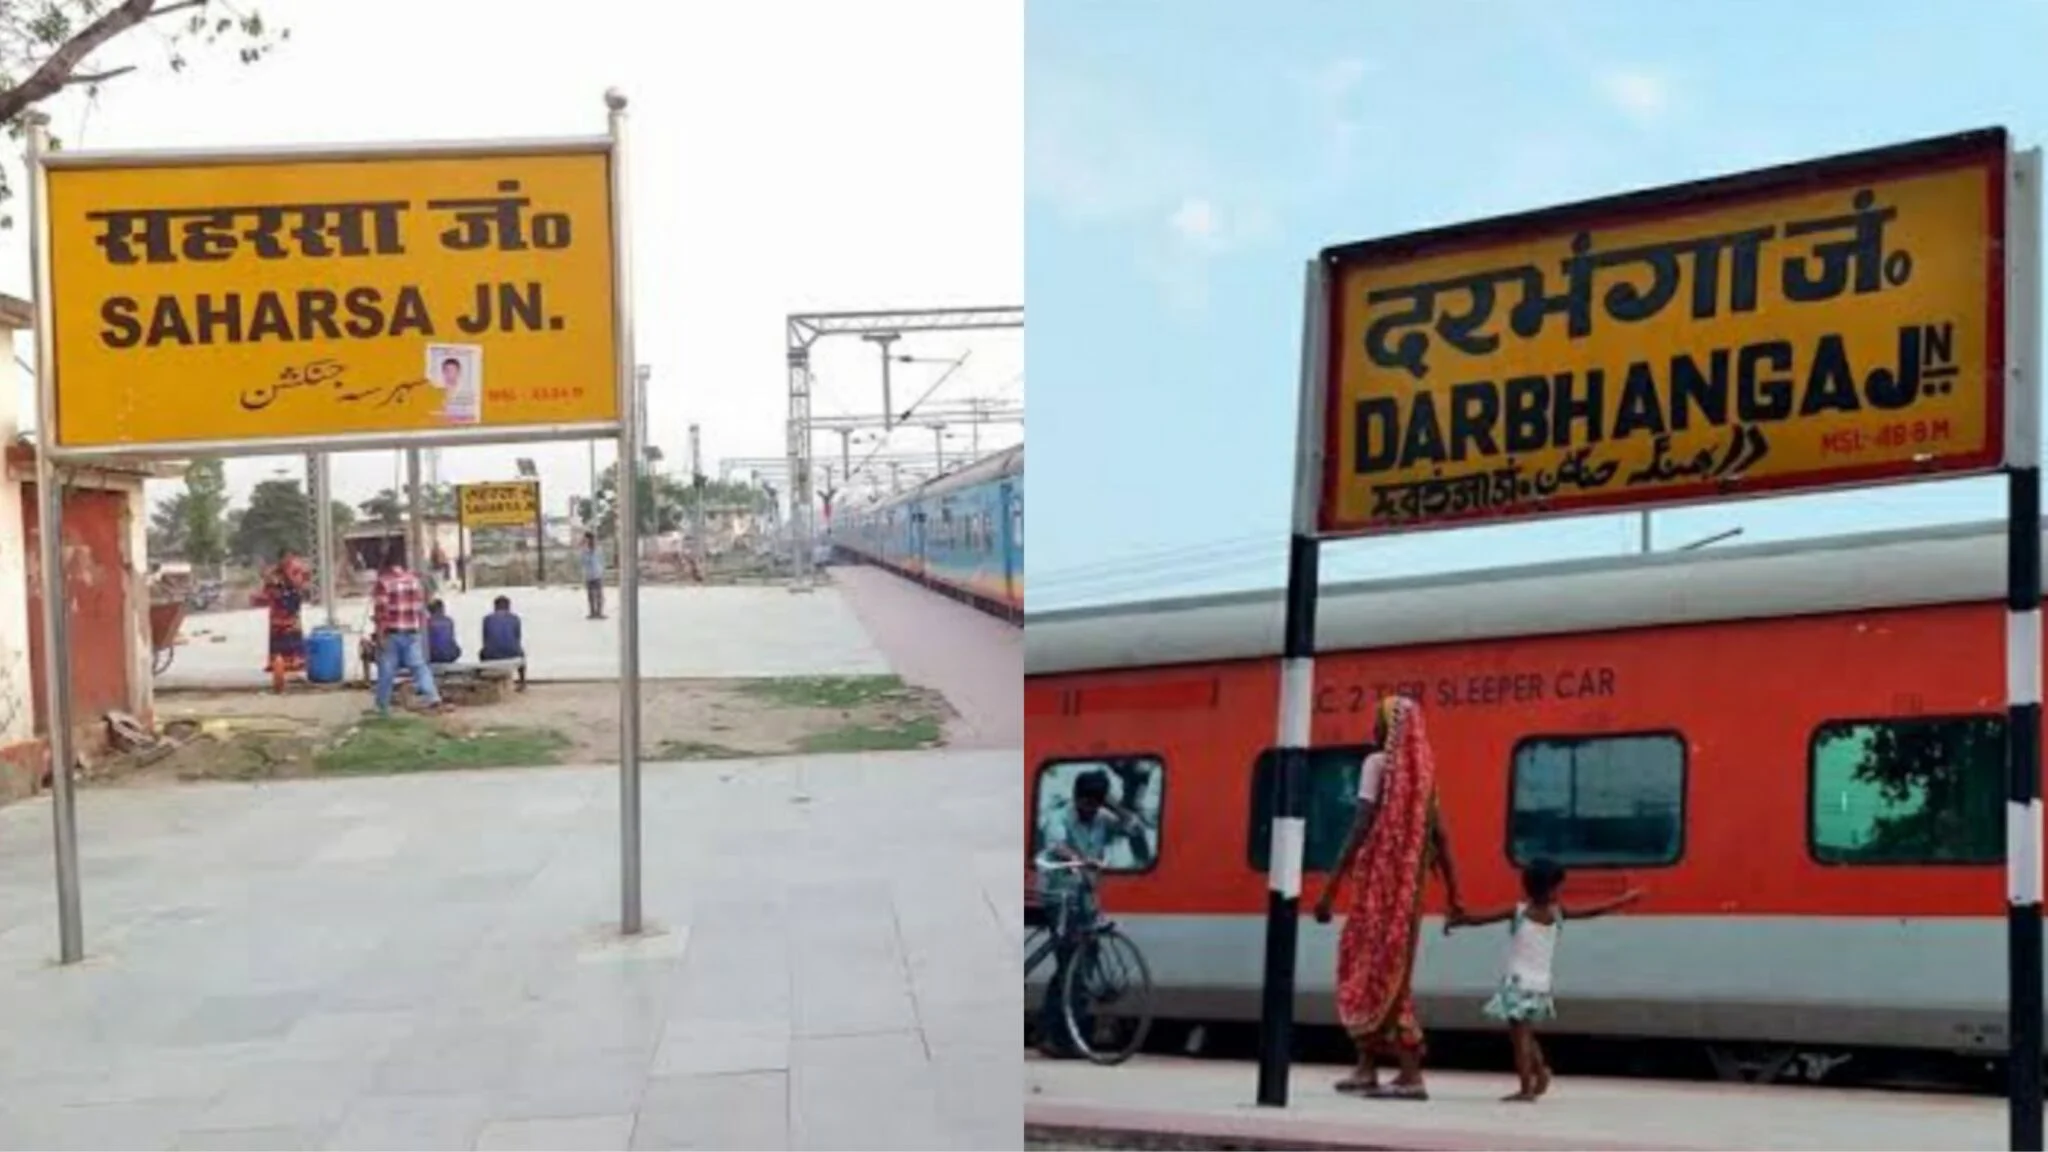 It will take less time to travel from Darbhanga to Saharsa